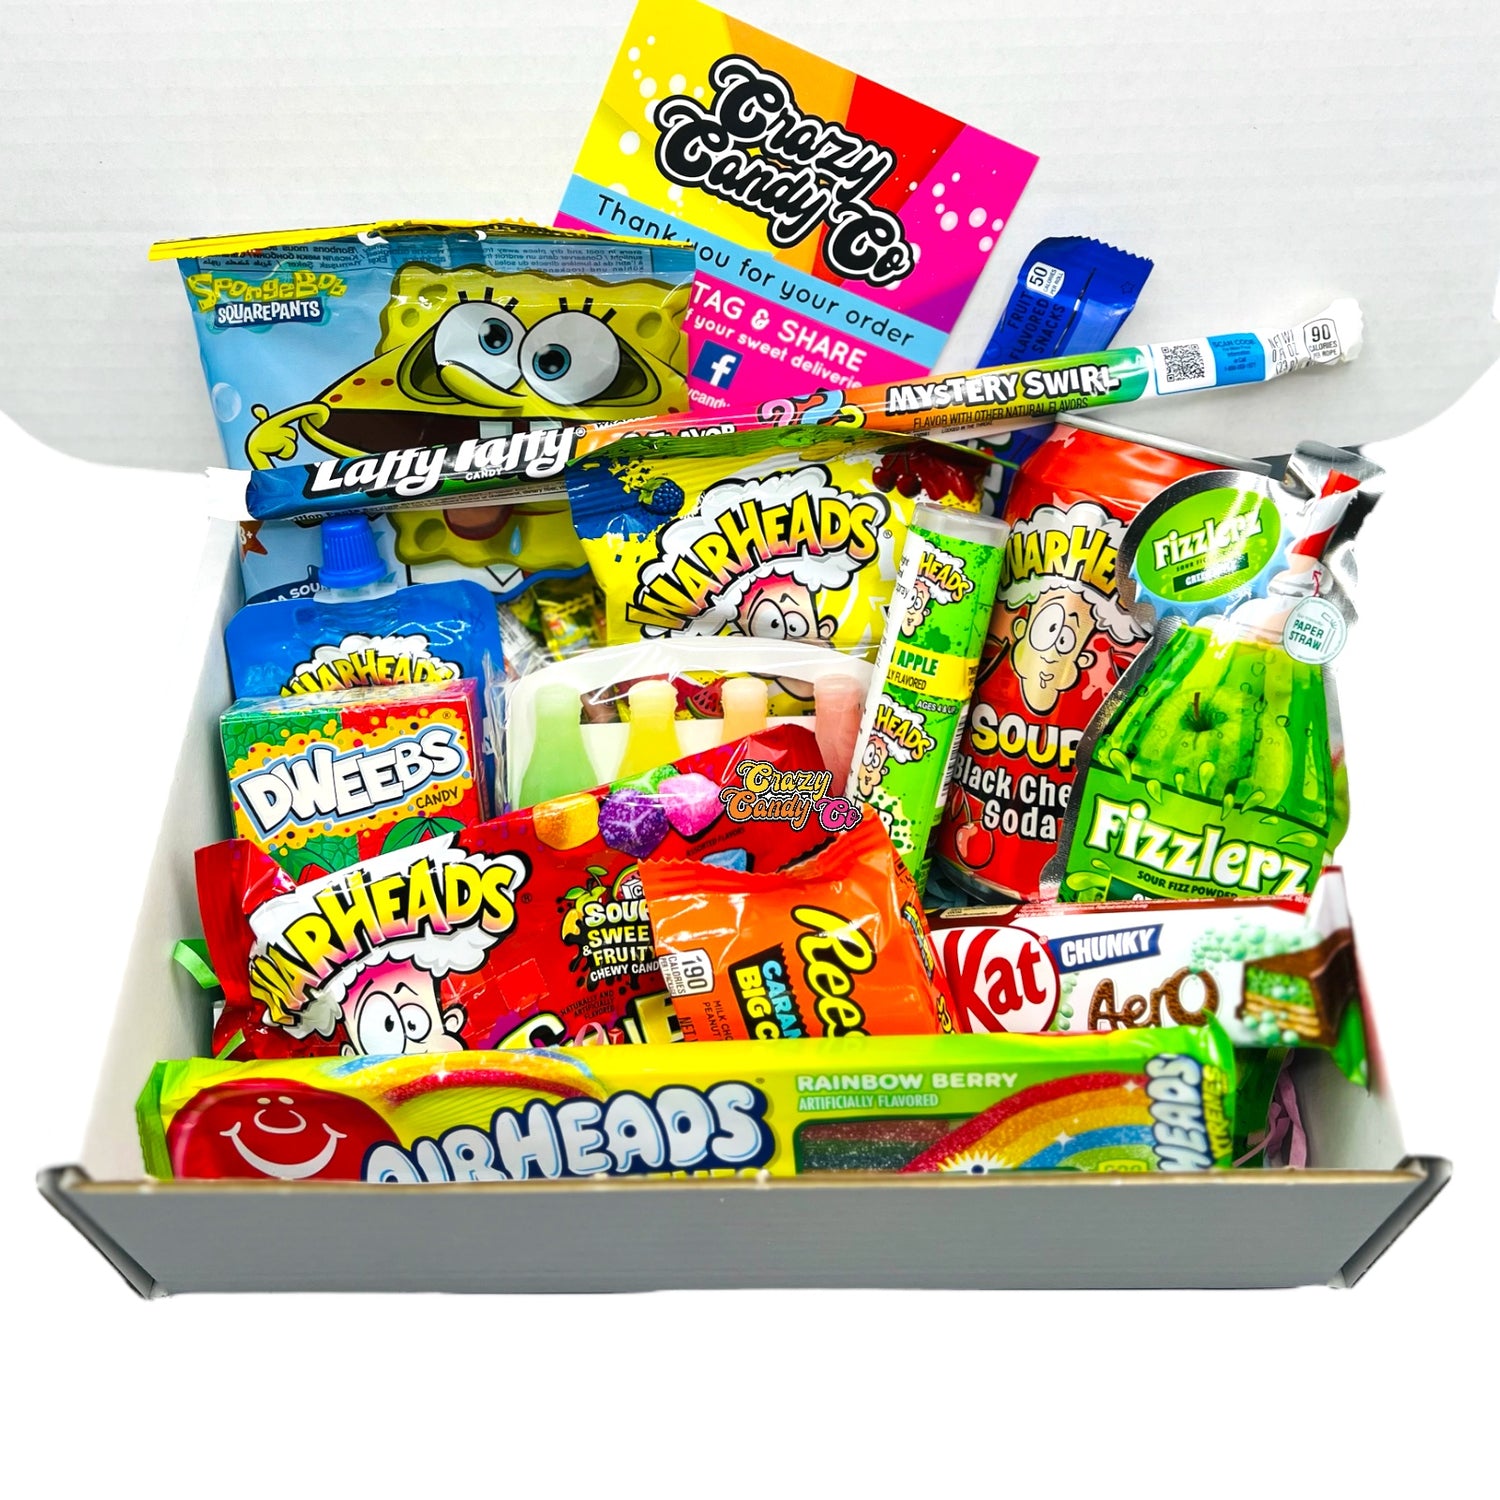 American Candy Gift Box (Sweets Chocolate Drink)